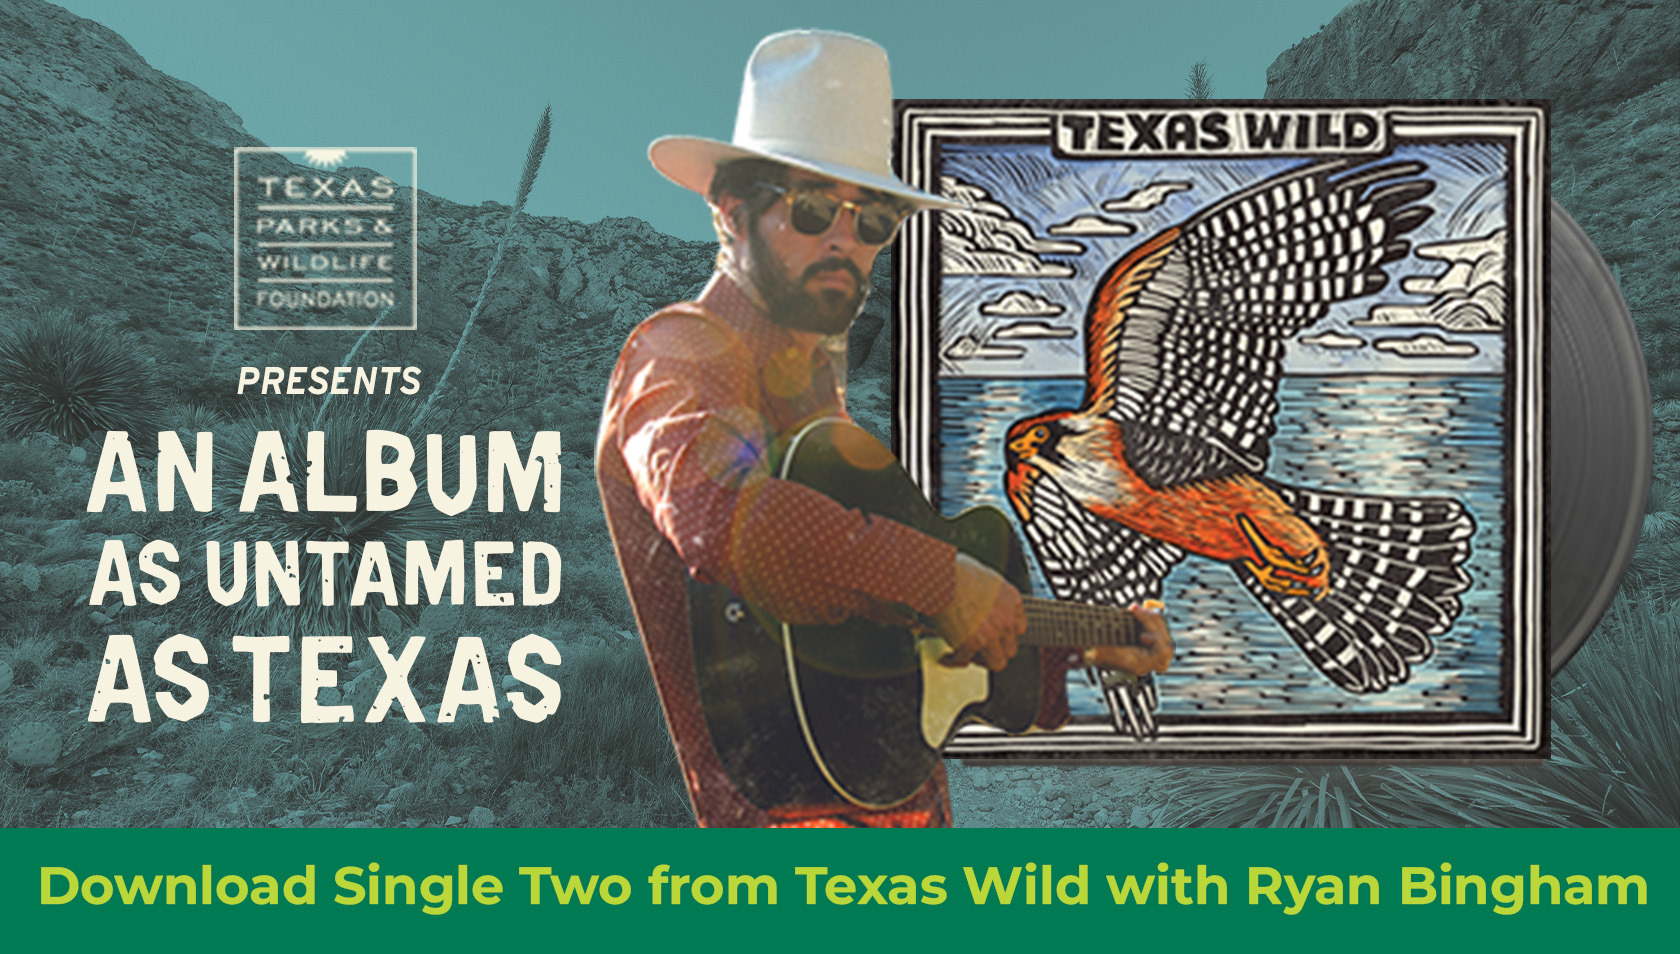 Story #4: Download Single Two from Texas Wild with Ryan Bingham